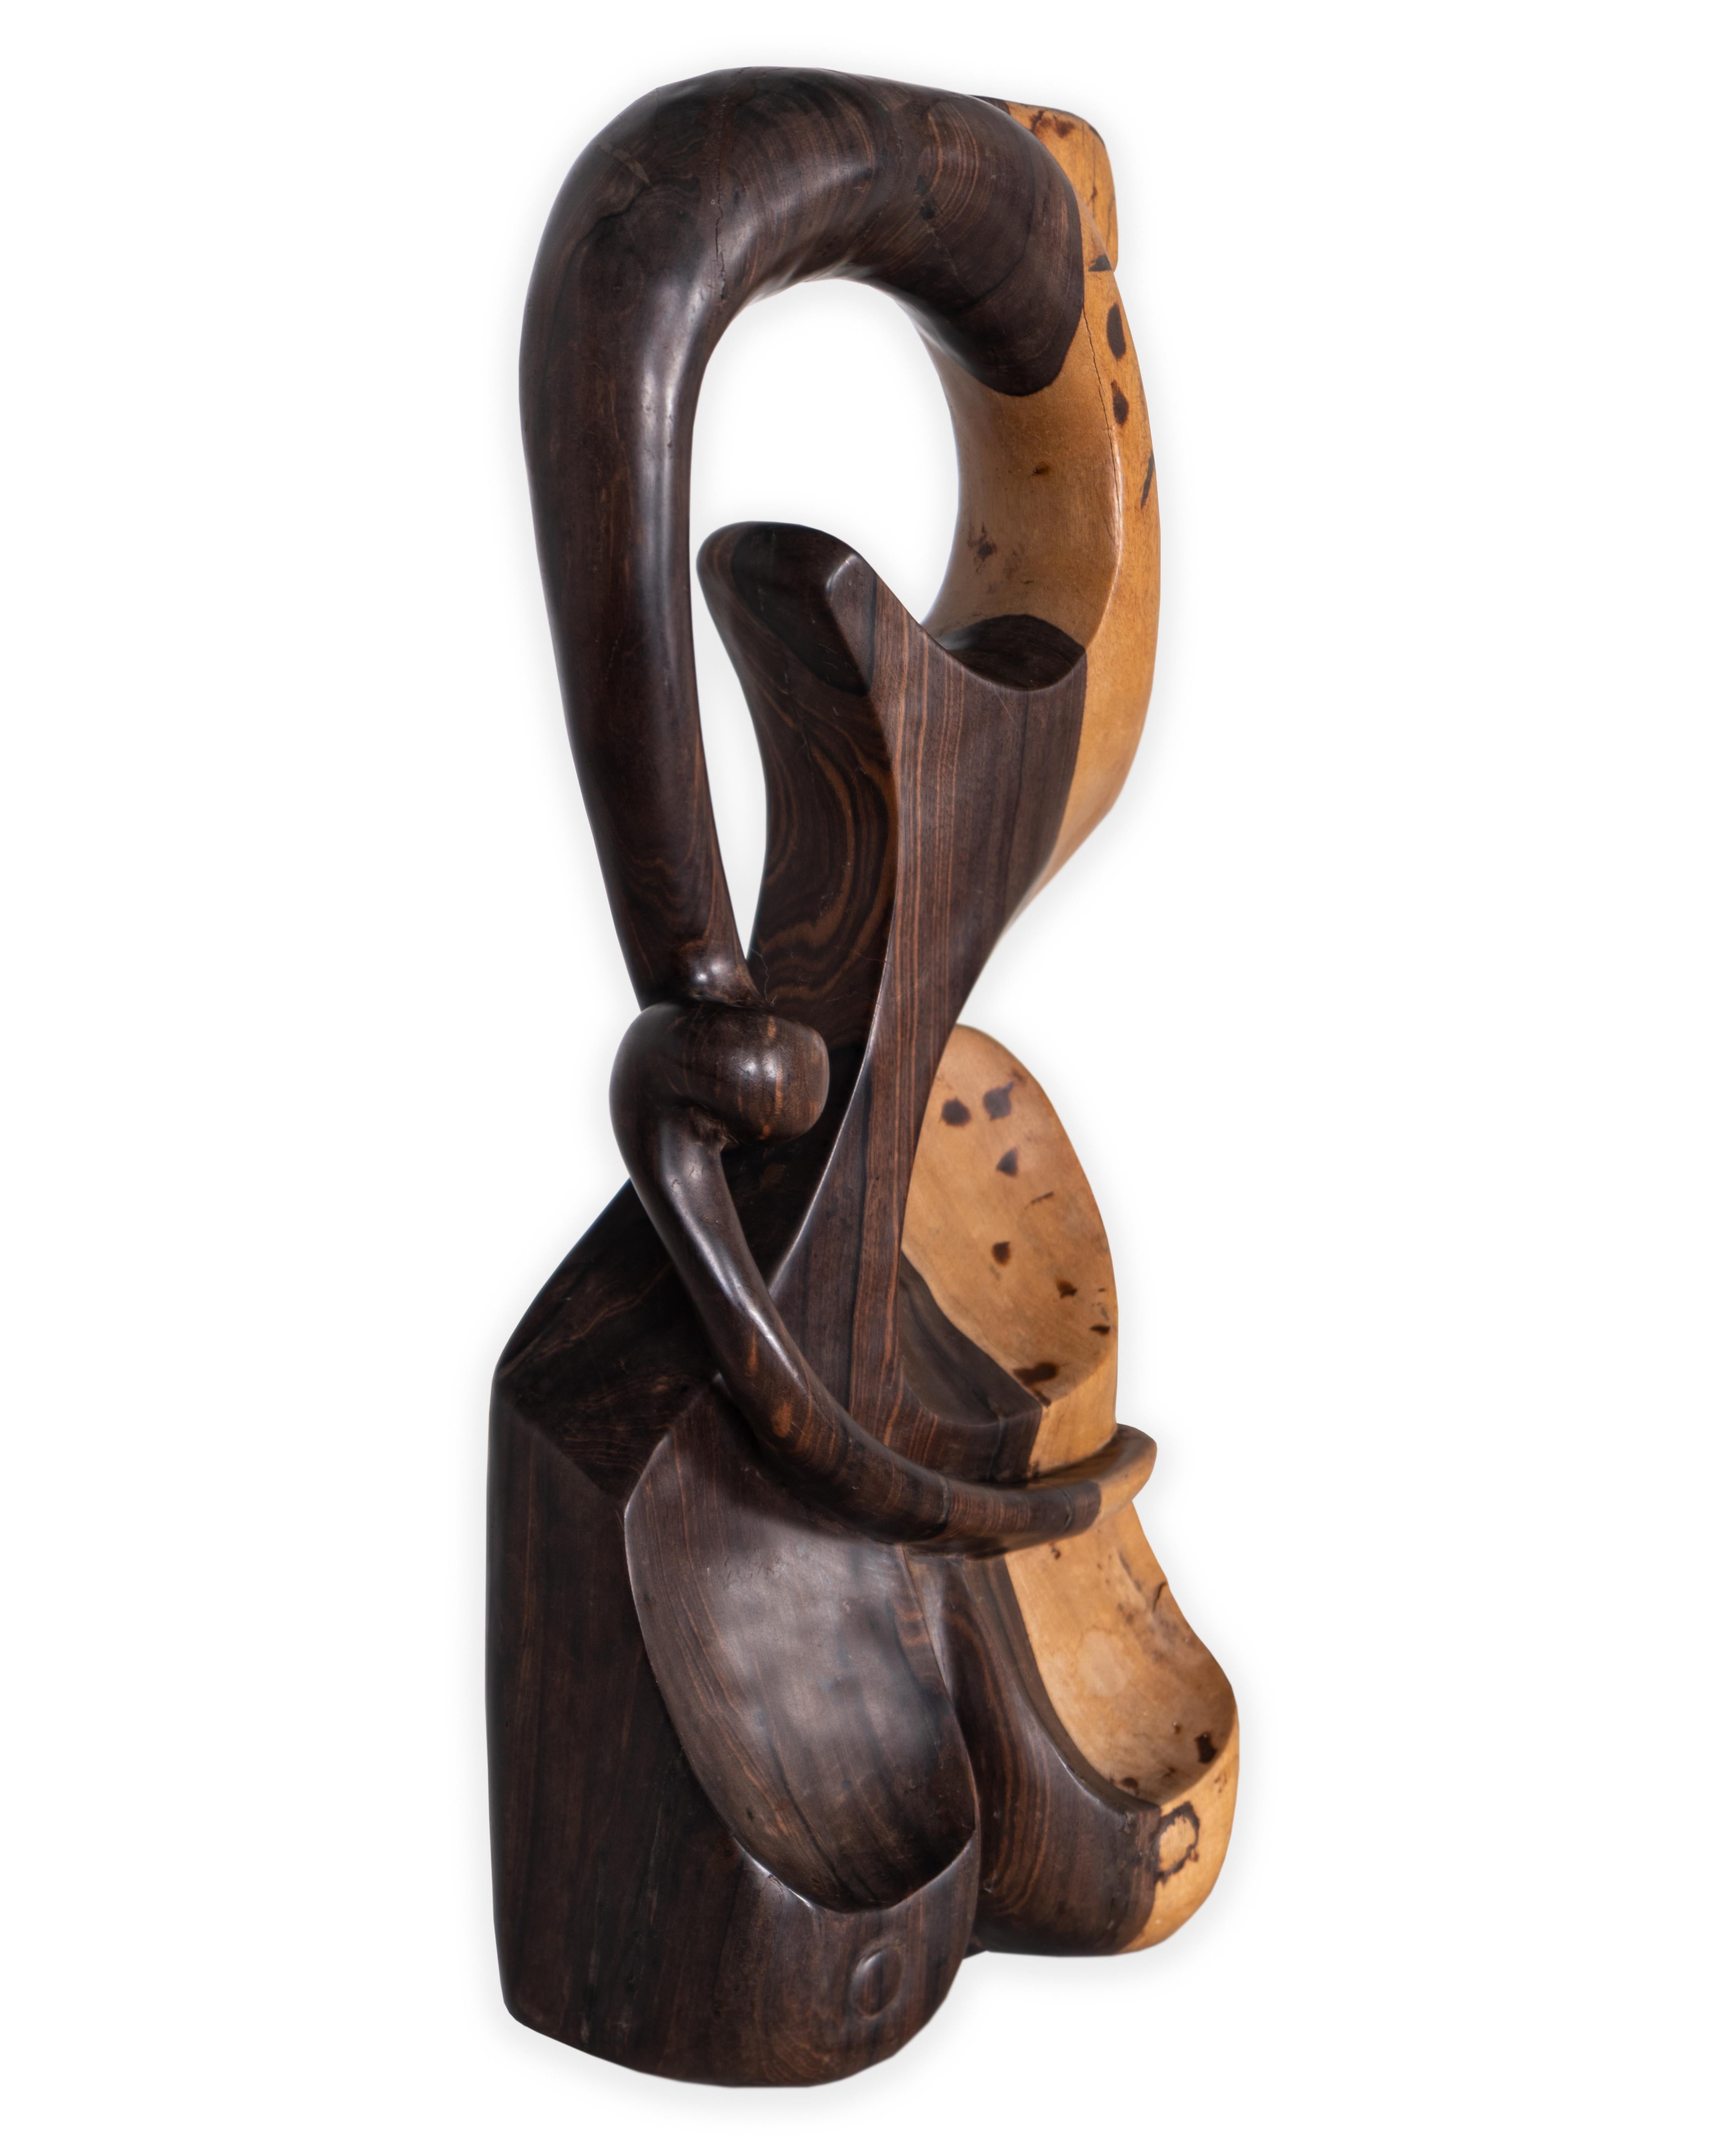 Carved ebony abstract wood bust. In my organic, contemporary, vintage and mid-century modern style.
Curated for our one of a kind line, Le Monde. Exclusive to Brendan Bass.